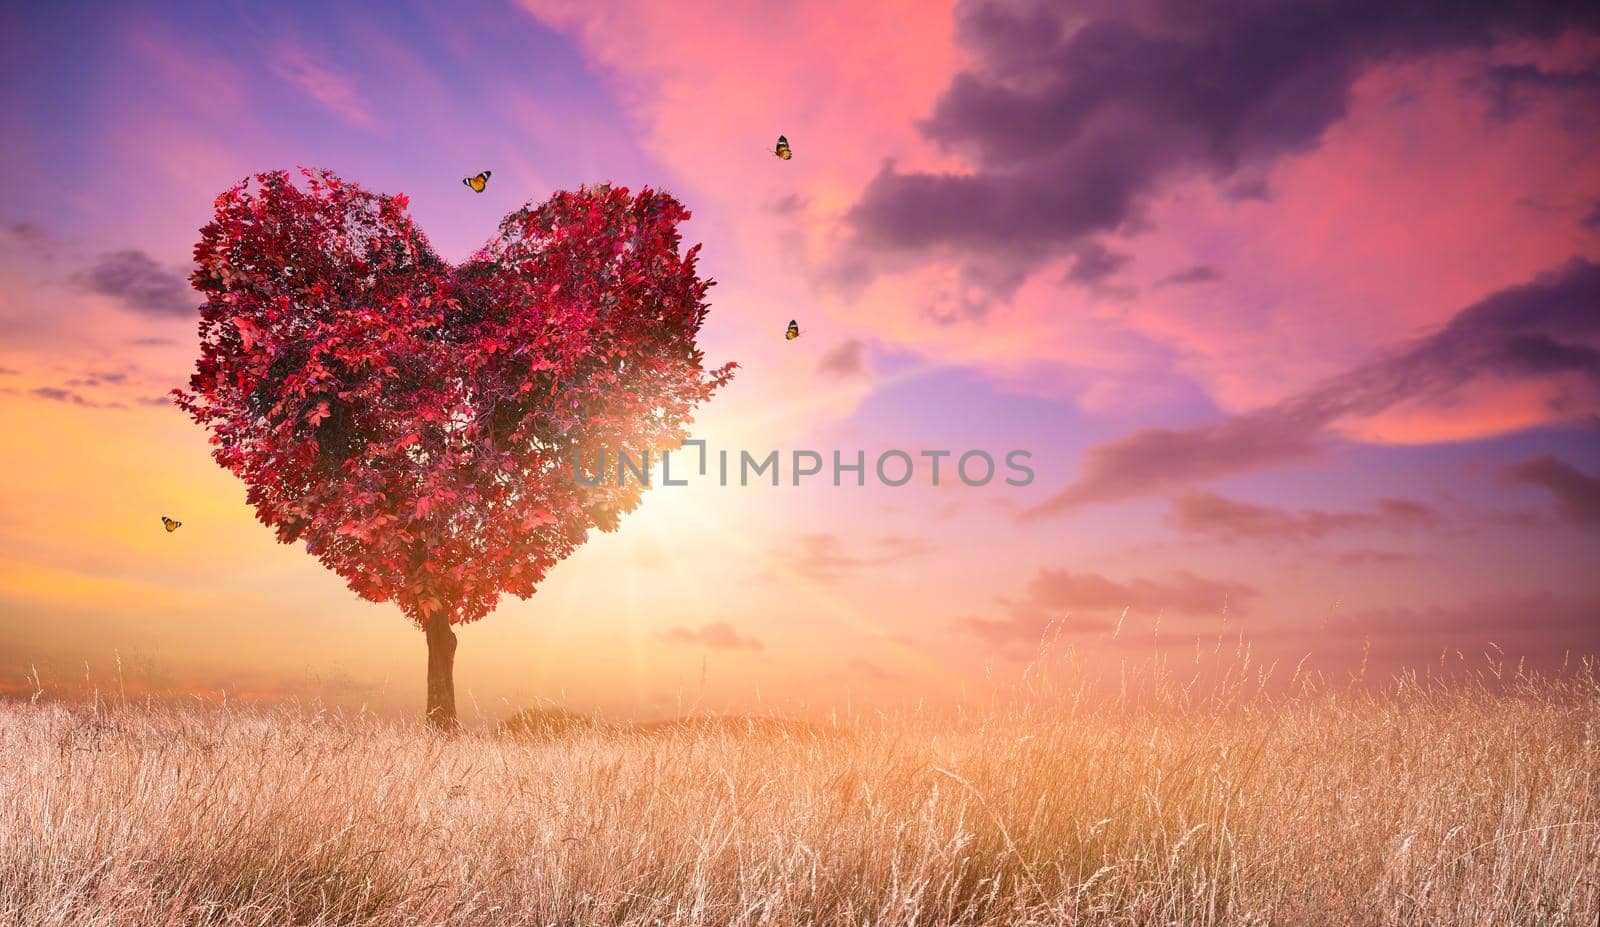 Heart Tree Love For Nature Red Landscape At Sunset by sarayut_thaneerat